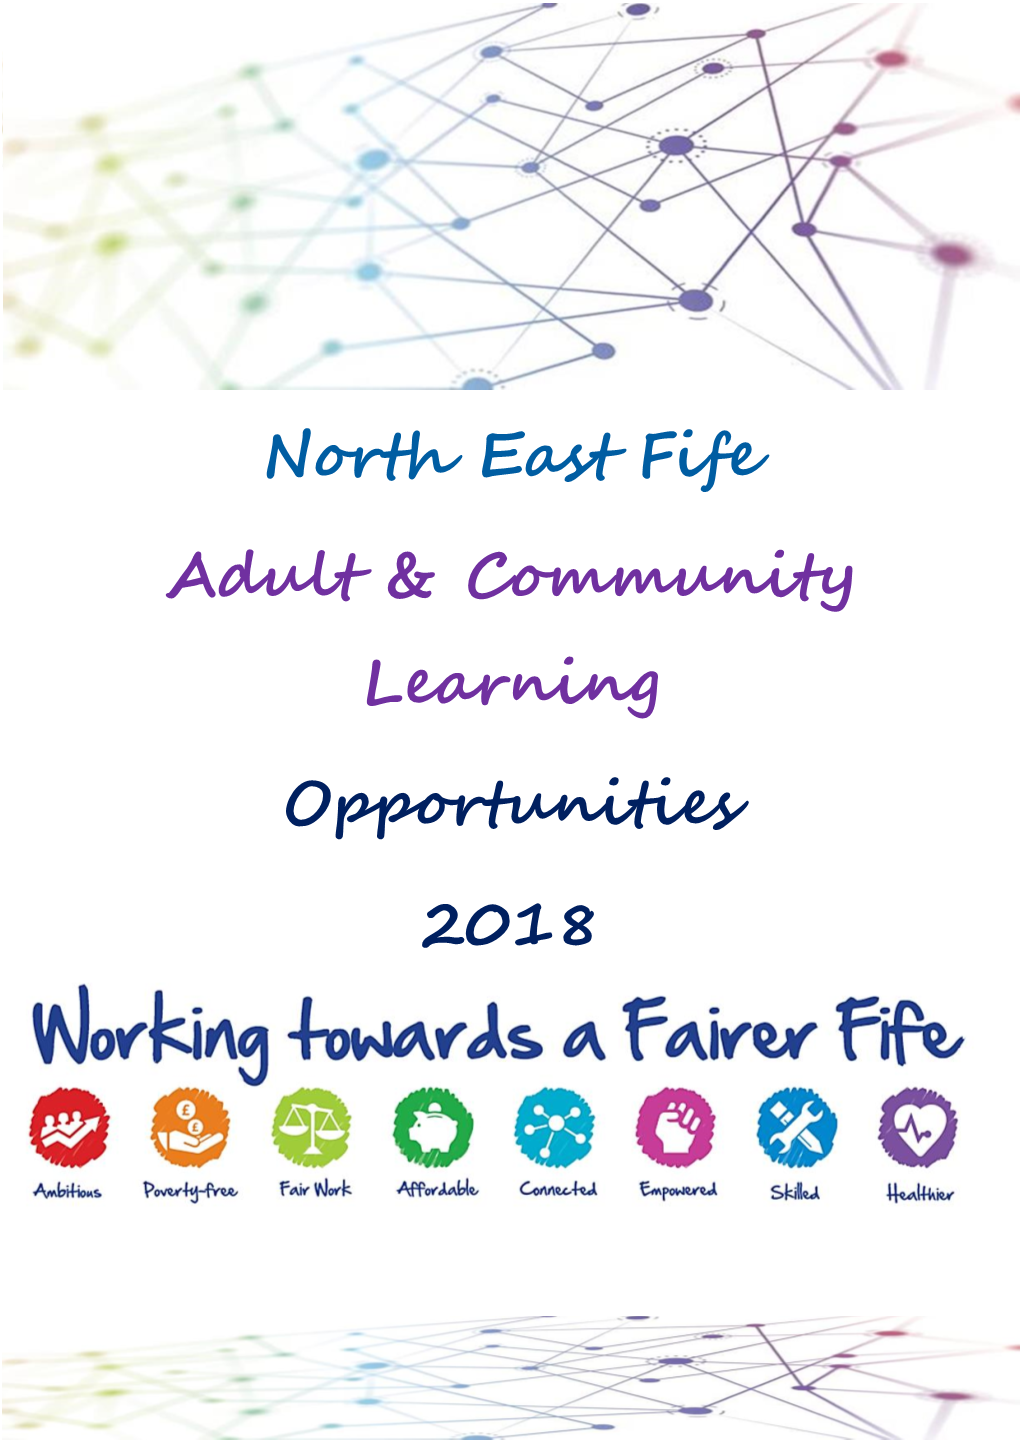 North East Fife Adult & Community Learning Guide 2018